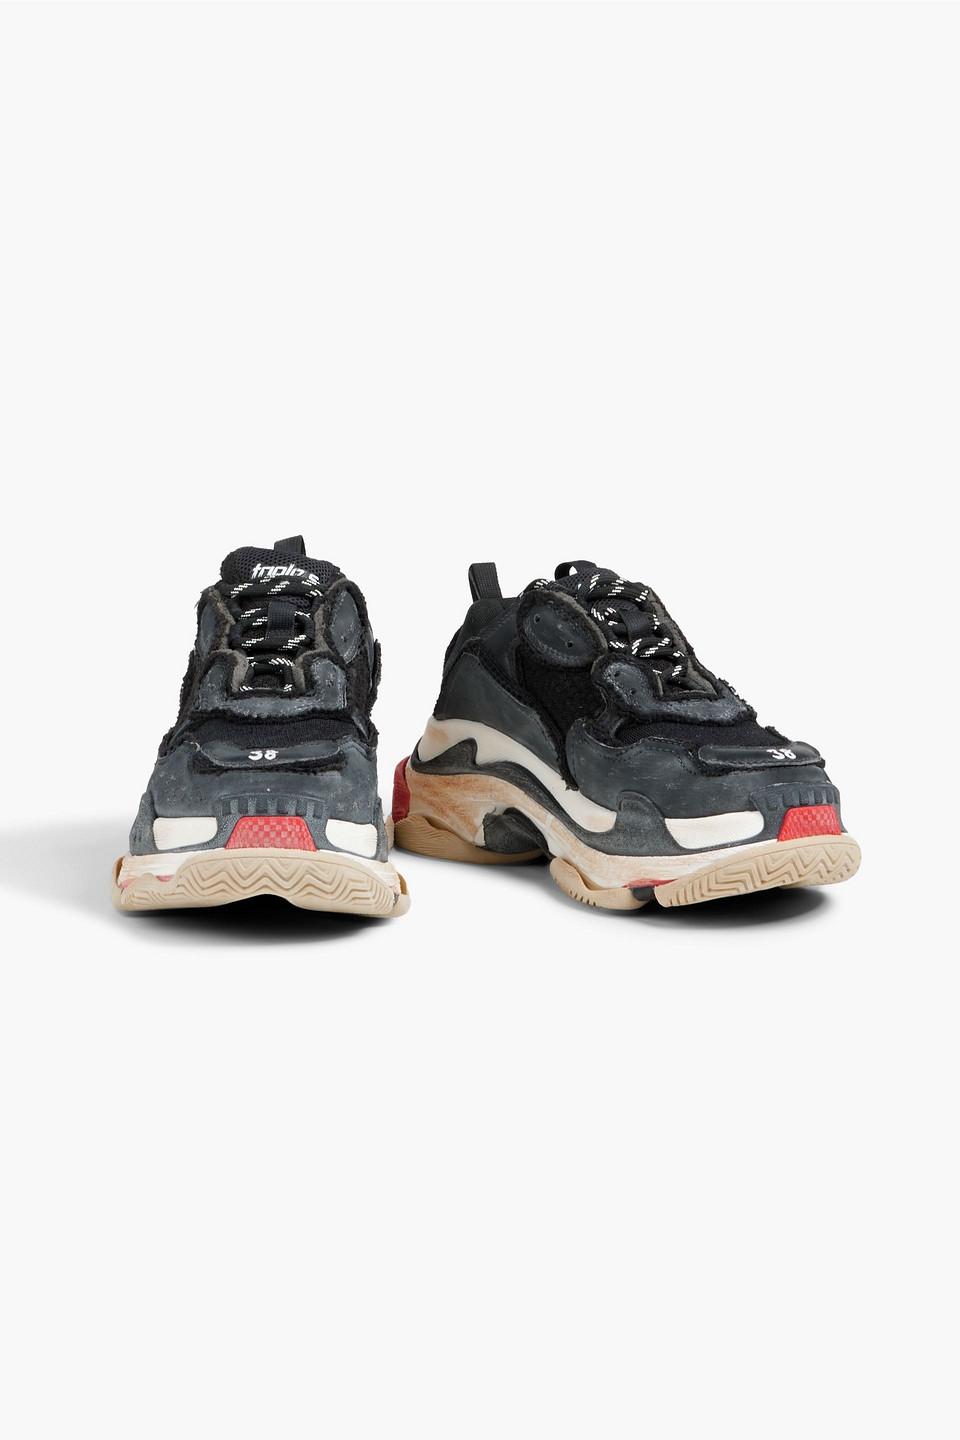 timeren græs kristen Balenciaga Triple S Distressed Leather And Mesh Sneakers in Black | Lyst